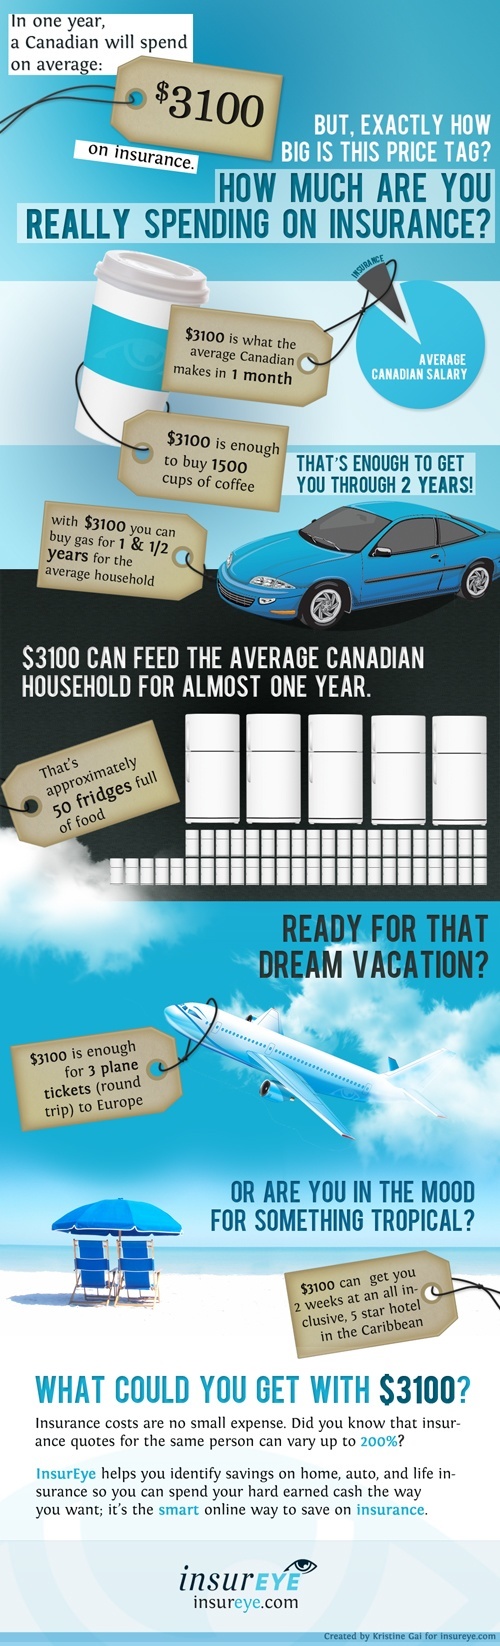 Infographic Insurance Spend in Canada